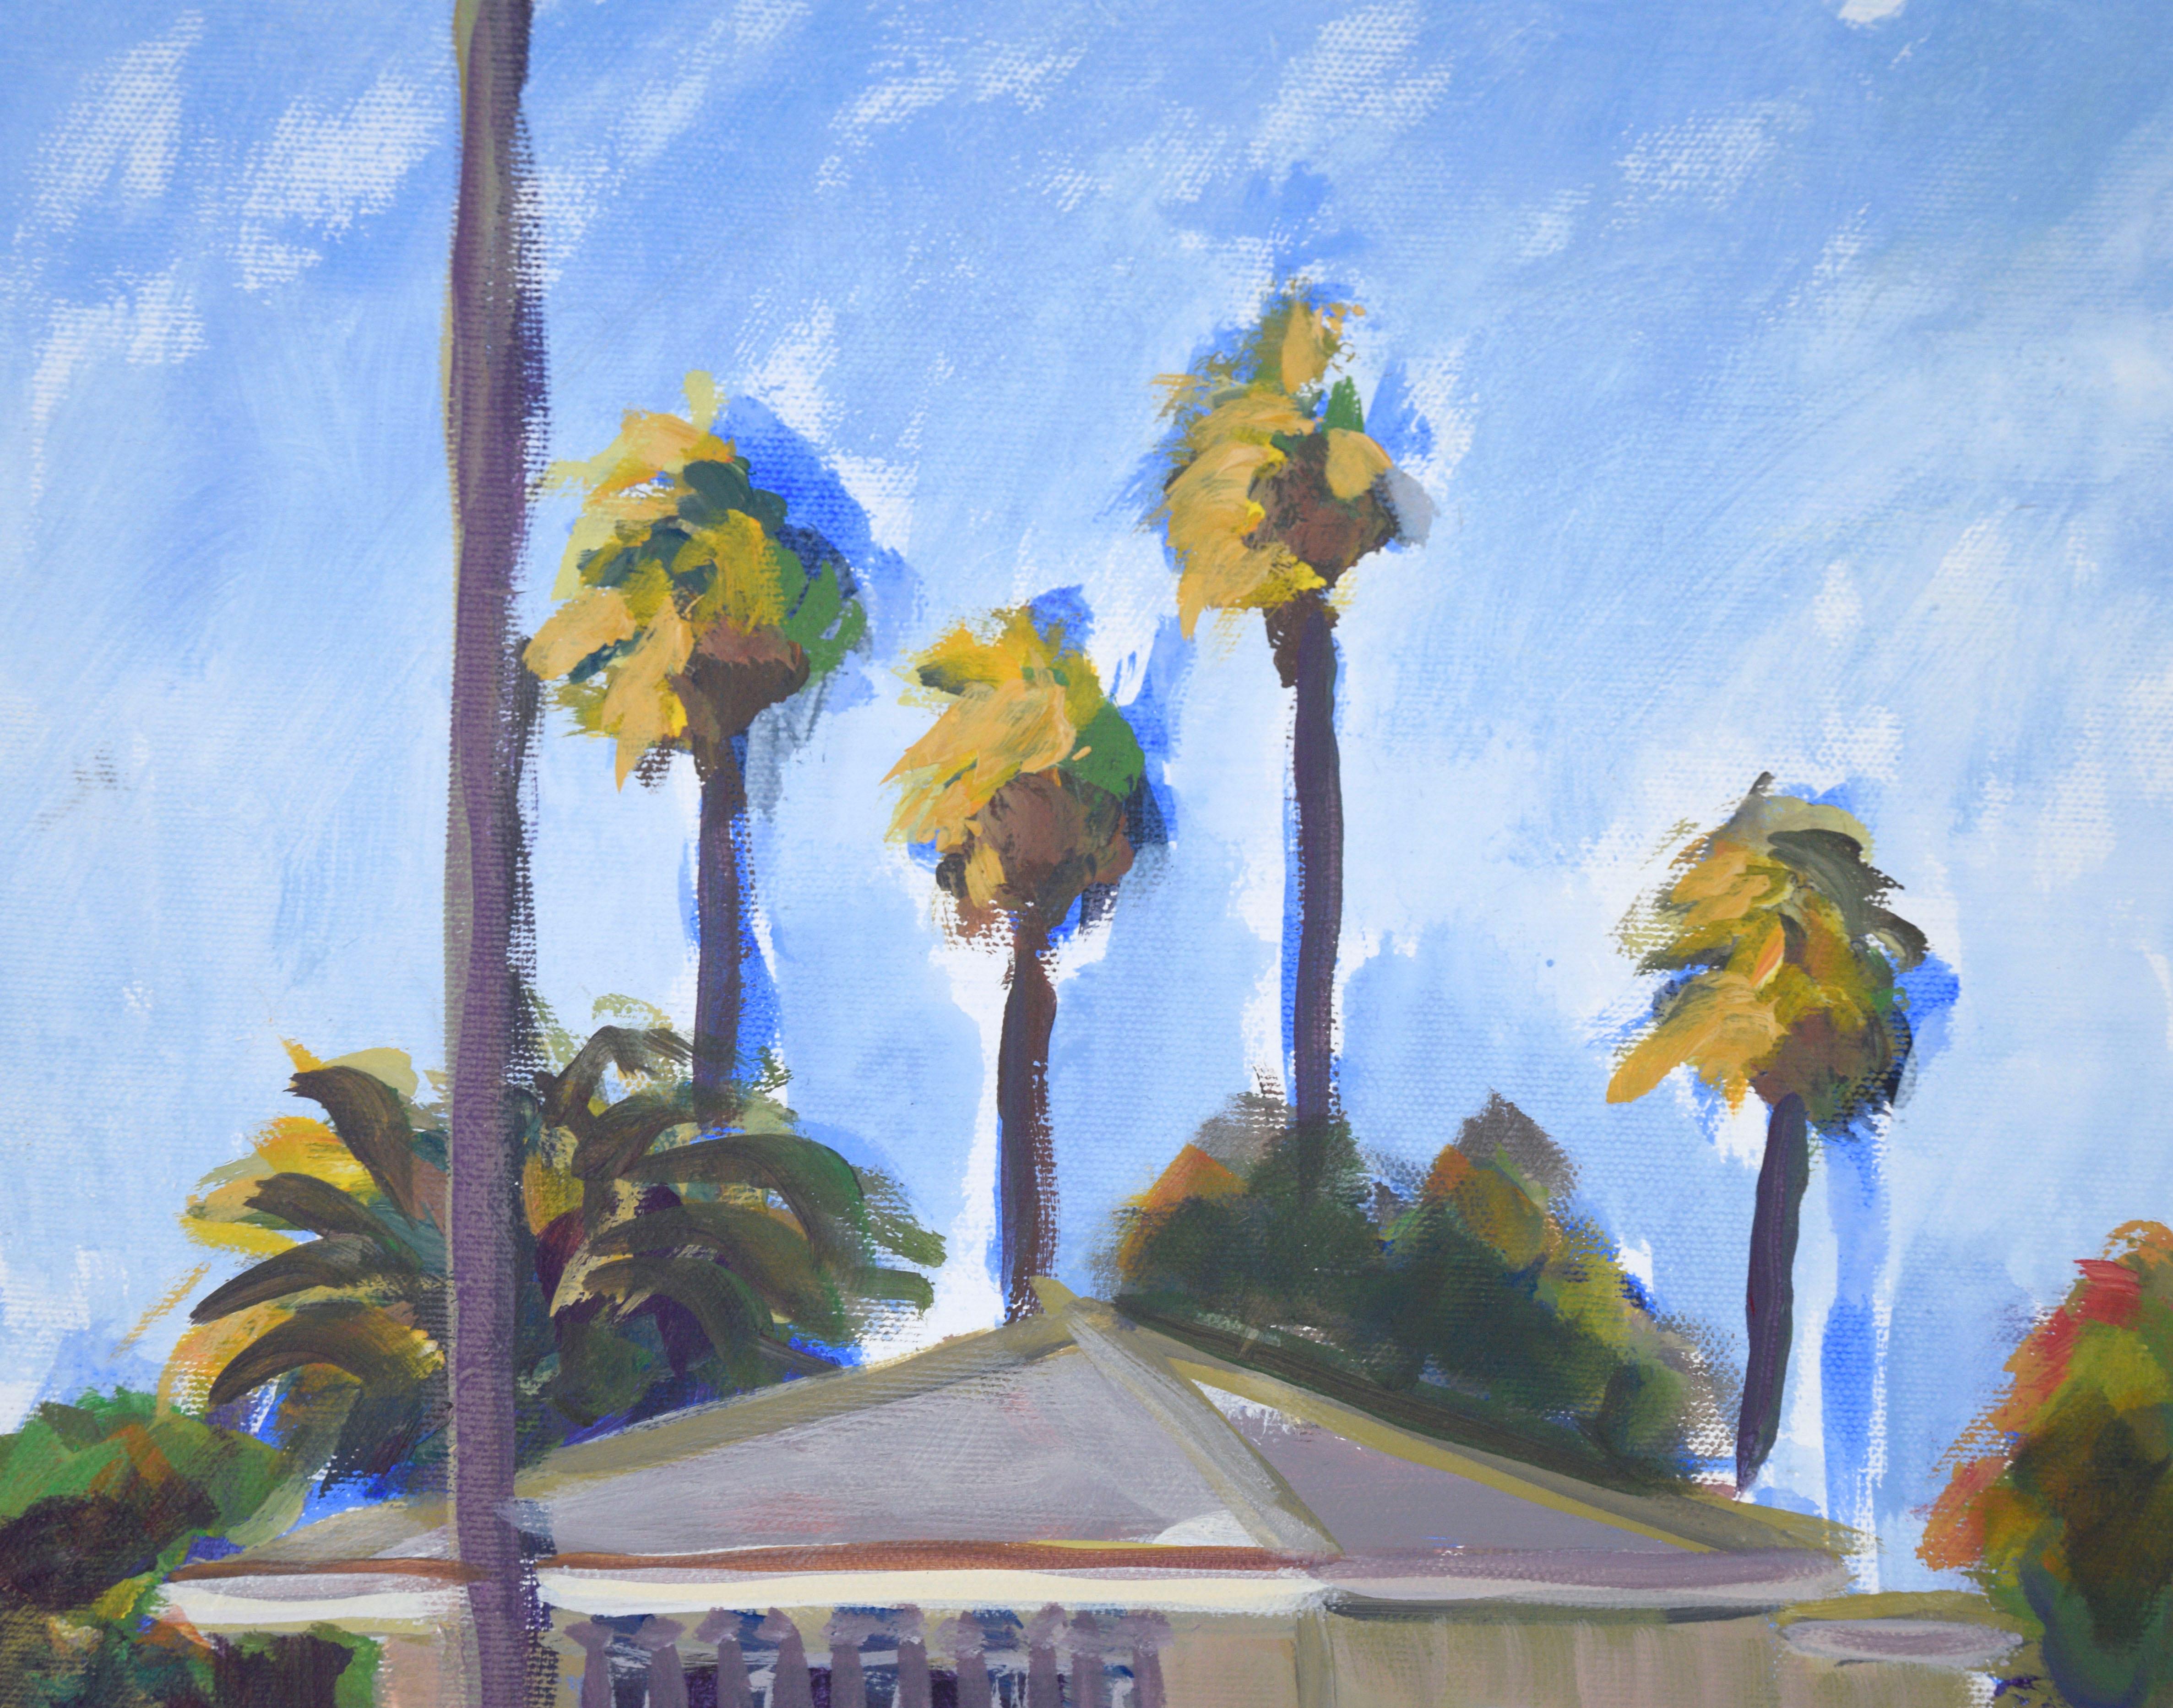 California Suburbs - Plein Aire Landscape in Acrylic on Canvas - Painting by Nick White